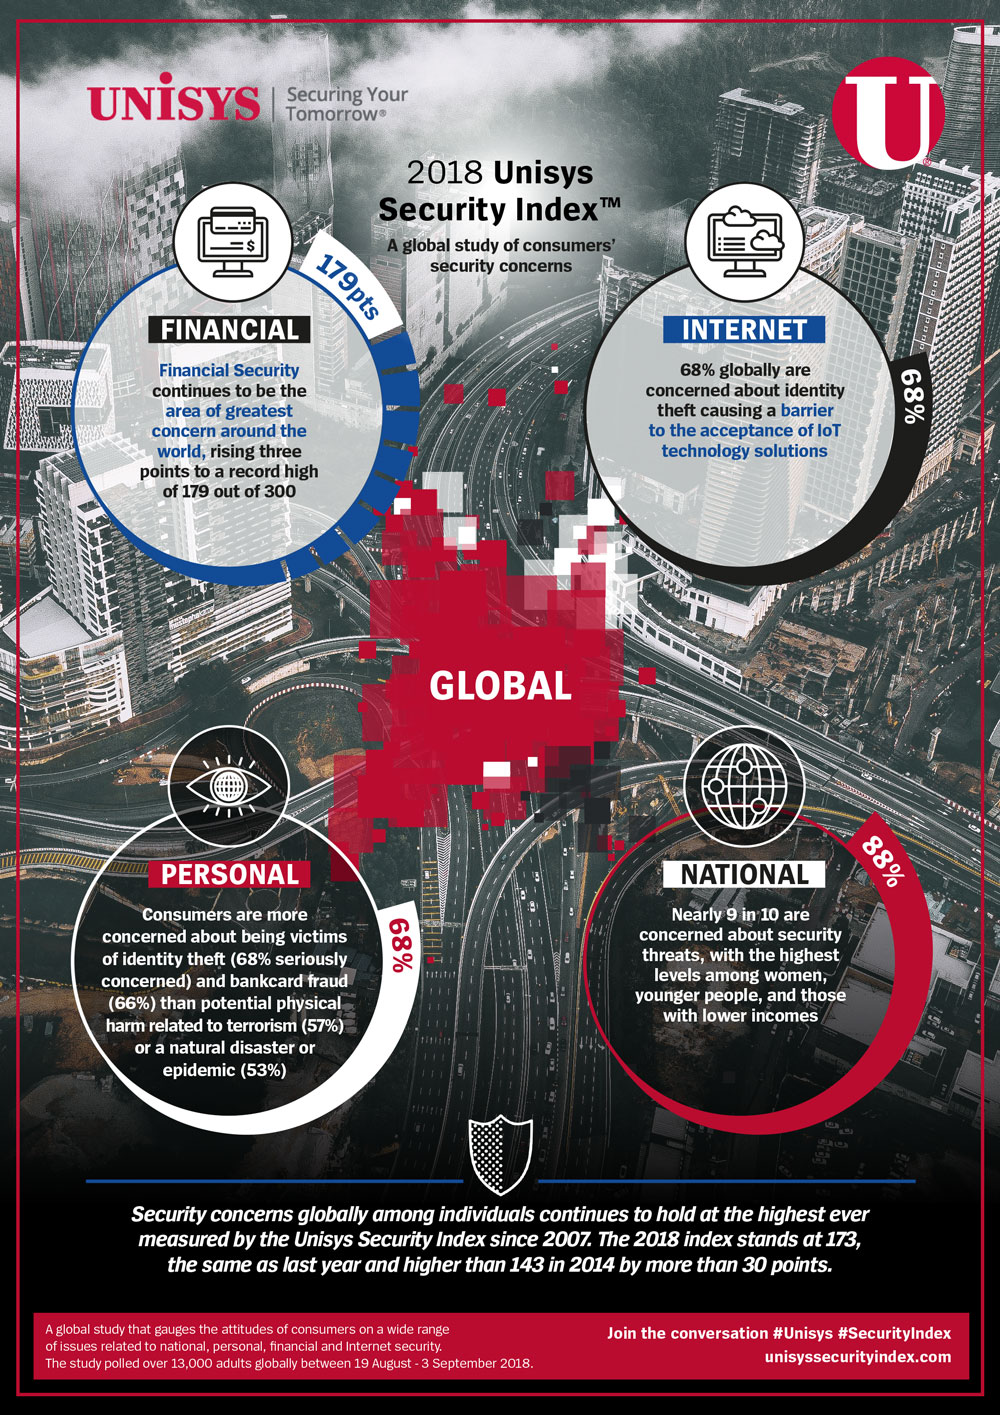 The image you sent is indeed the 2018 Unisys Security Index infographic. It shows a global study on consumer security concerns. Here’s a breakdown of the key points: Overall Security Concerns Security concerns globally are at an all-time high according to the Unisys Security Index since it began in 2007. The 2018 index score is 173, which is the same as 2017 but 30 points higher than 2014. Financial security is the top area of concern around the world (179 out of 300 possible points). Financial Security Concerns Identity theft is the greatest concern related to financial security (68% of respondents are seriously concerned). Bank card fraud is another major concern (66% are seriously concerned). These security concerns are a barrier to the acceptance of internet of things (IoT) technology solutions. Personal Security Concerns Nearly nine in ten respondents are concerned about security threats in general. Identity theft is the top personal security concern (68% are seriously concerned). Women, younger people, and those with lower incomes tend to have higher levels of security concerns. The infographic also shows that the Unisys Security Index is a global study that measures consumer attitudes on a wide range of security issues. The 2018 study surveyed over 13,000 adults in 13 countries.